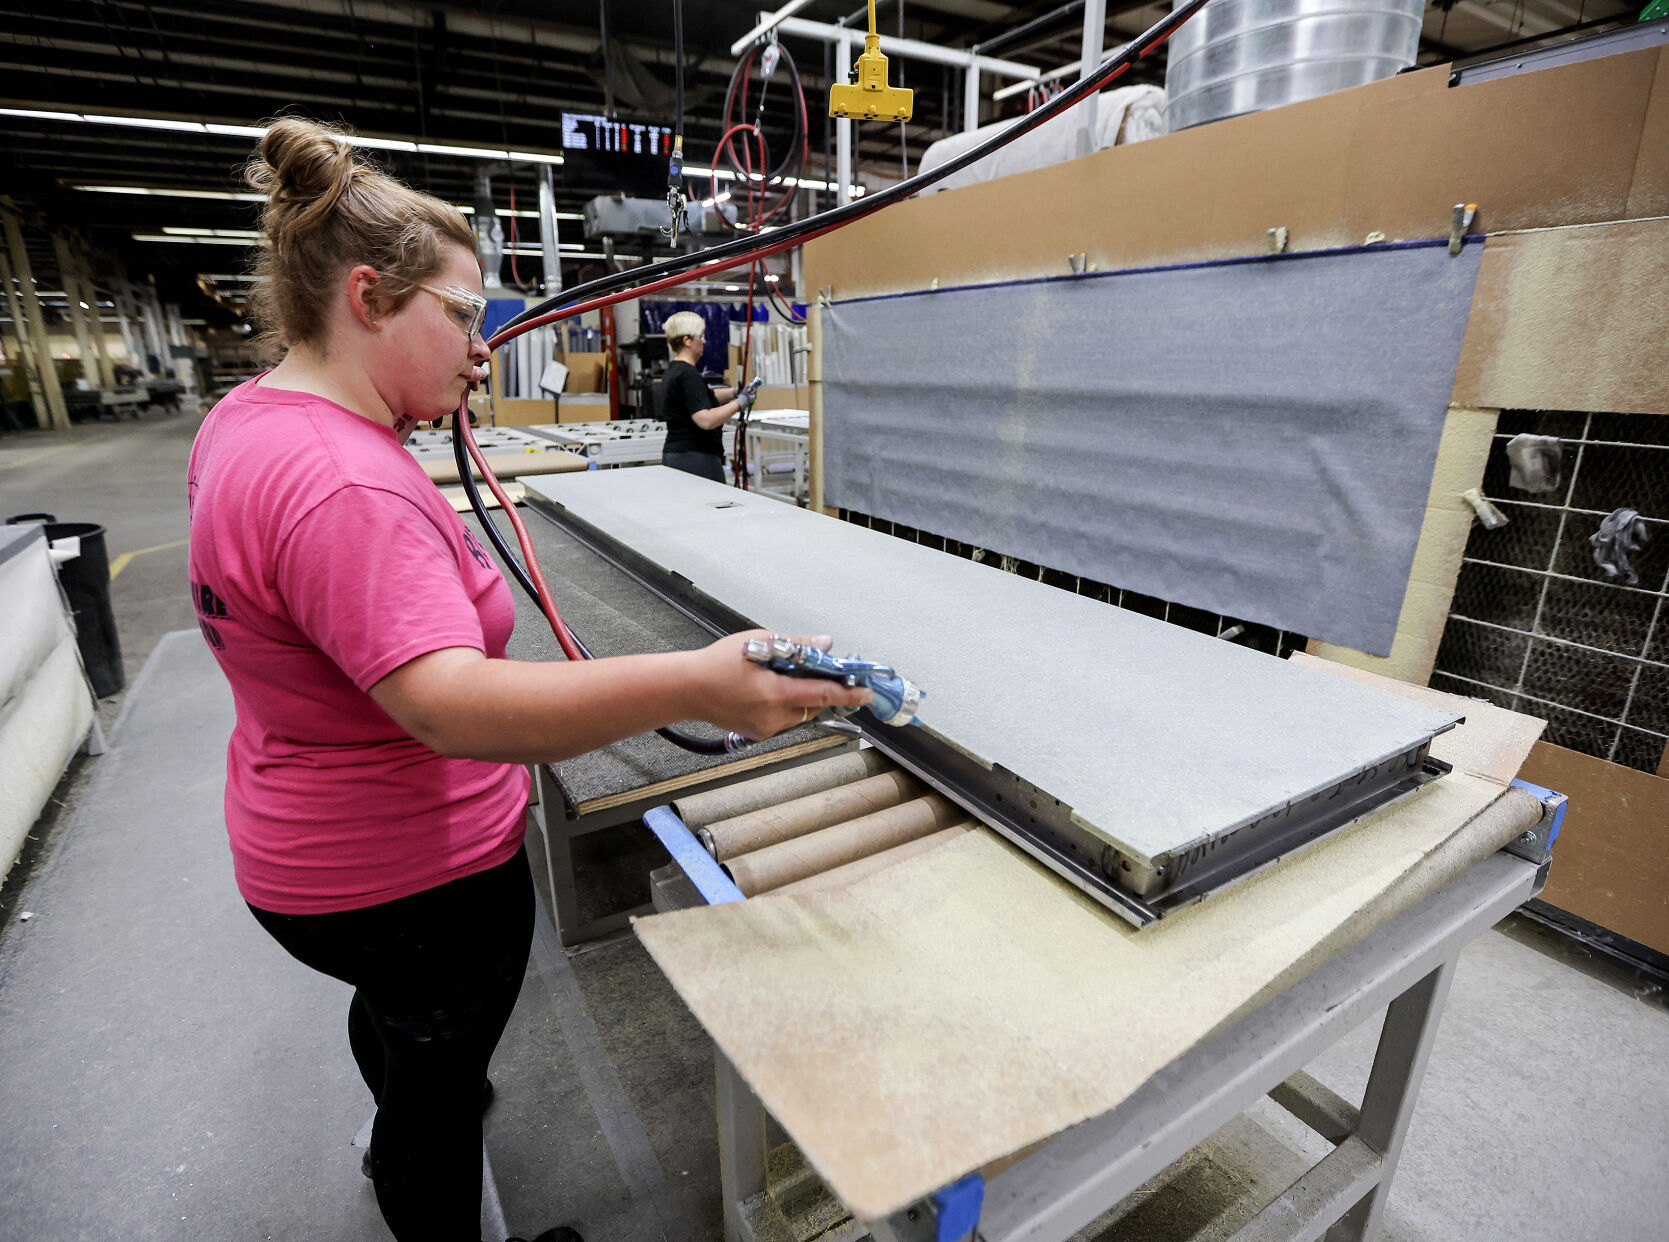 Modernfold employee Jaclyn Wagner works on a product on one of the company’s assembly lines.    PHOTO CREDIT: Dave Kettering